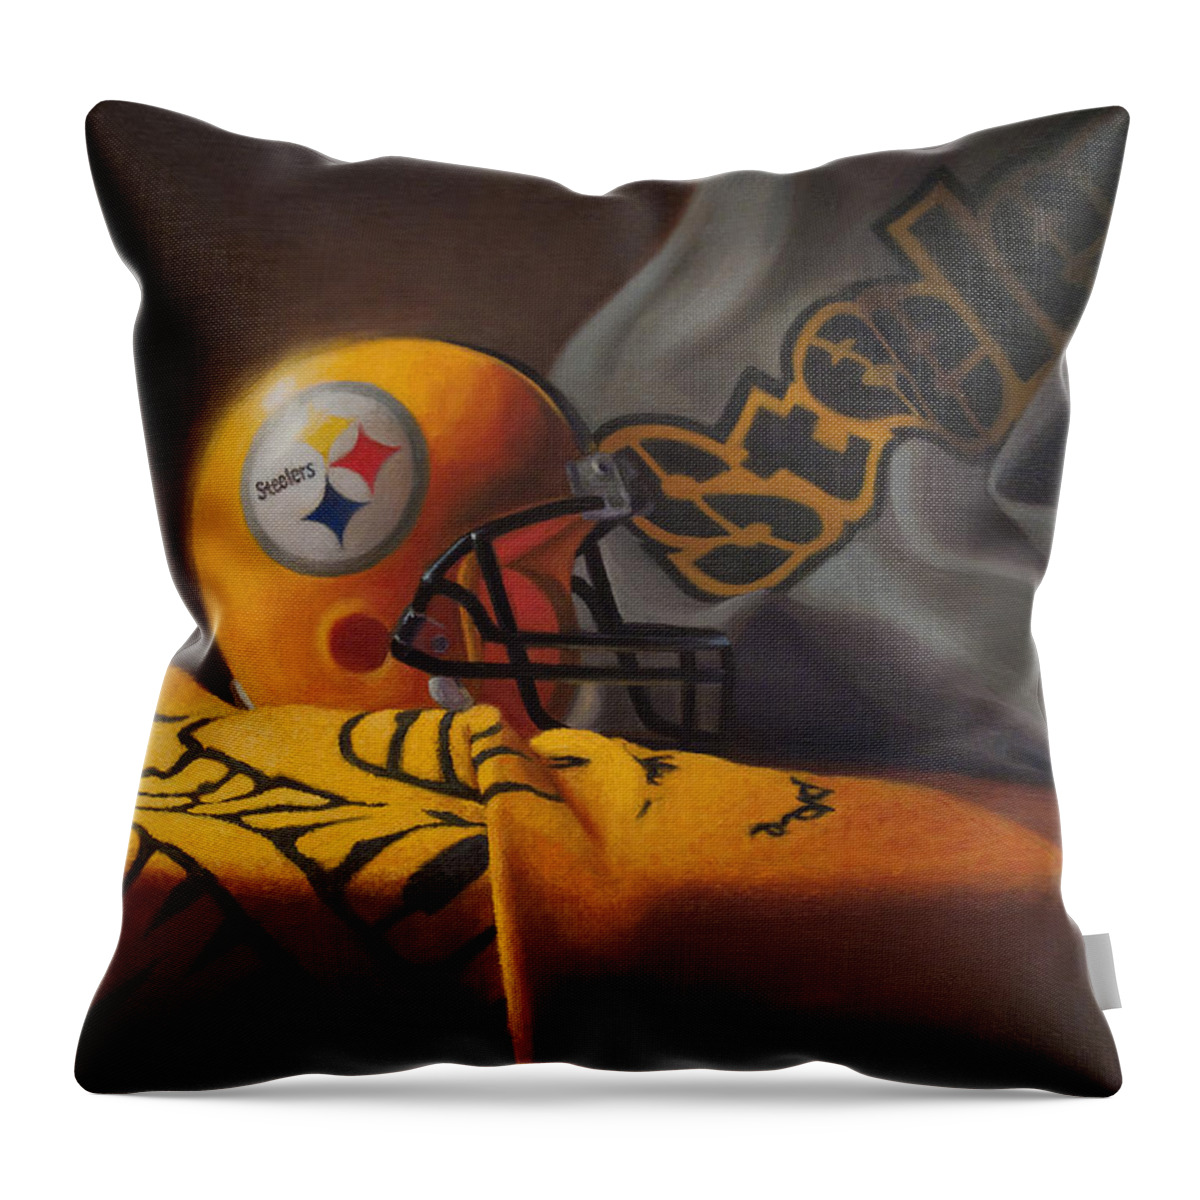 Steelers Throw Pillow featuring the painting Mini Helmet Commemorative Edition by Joe Winkler